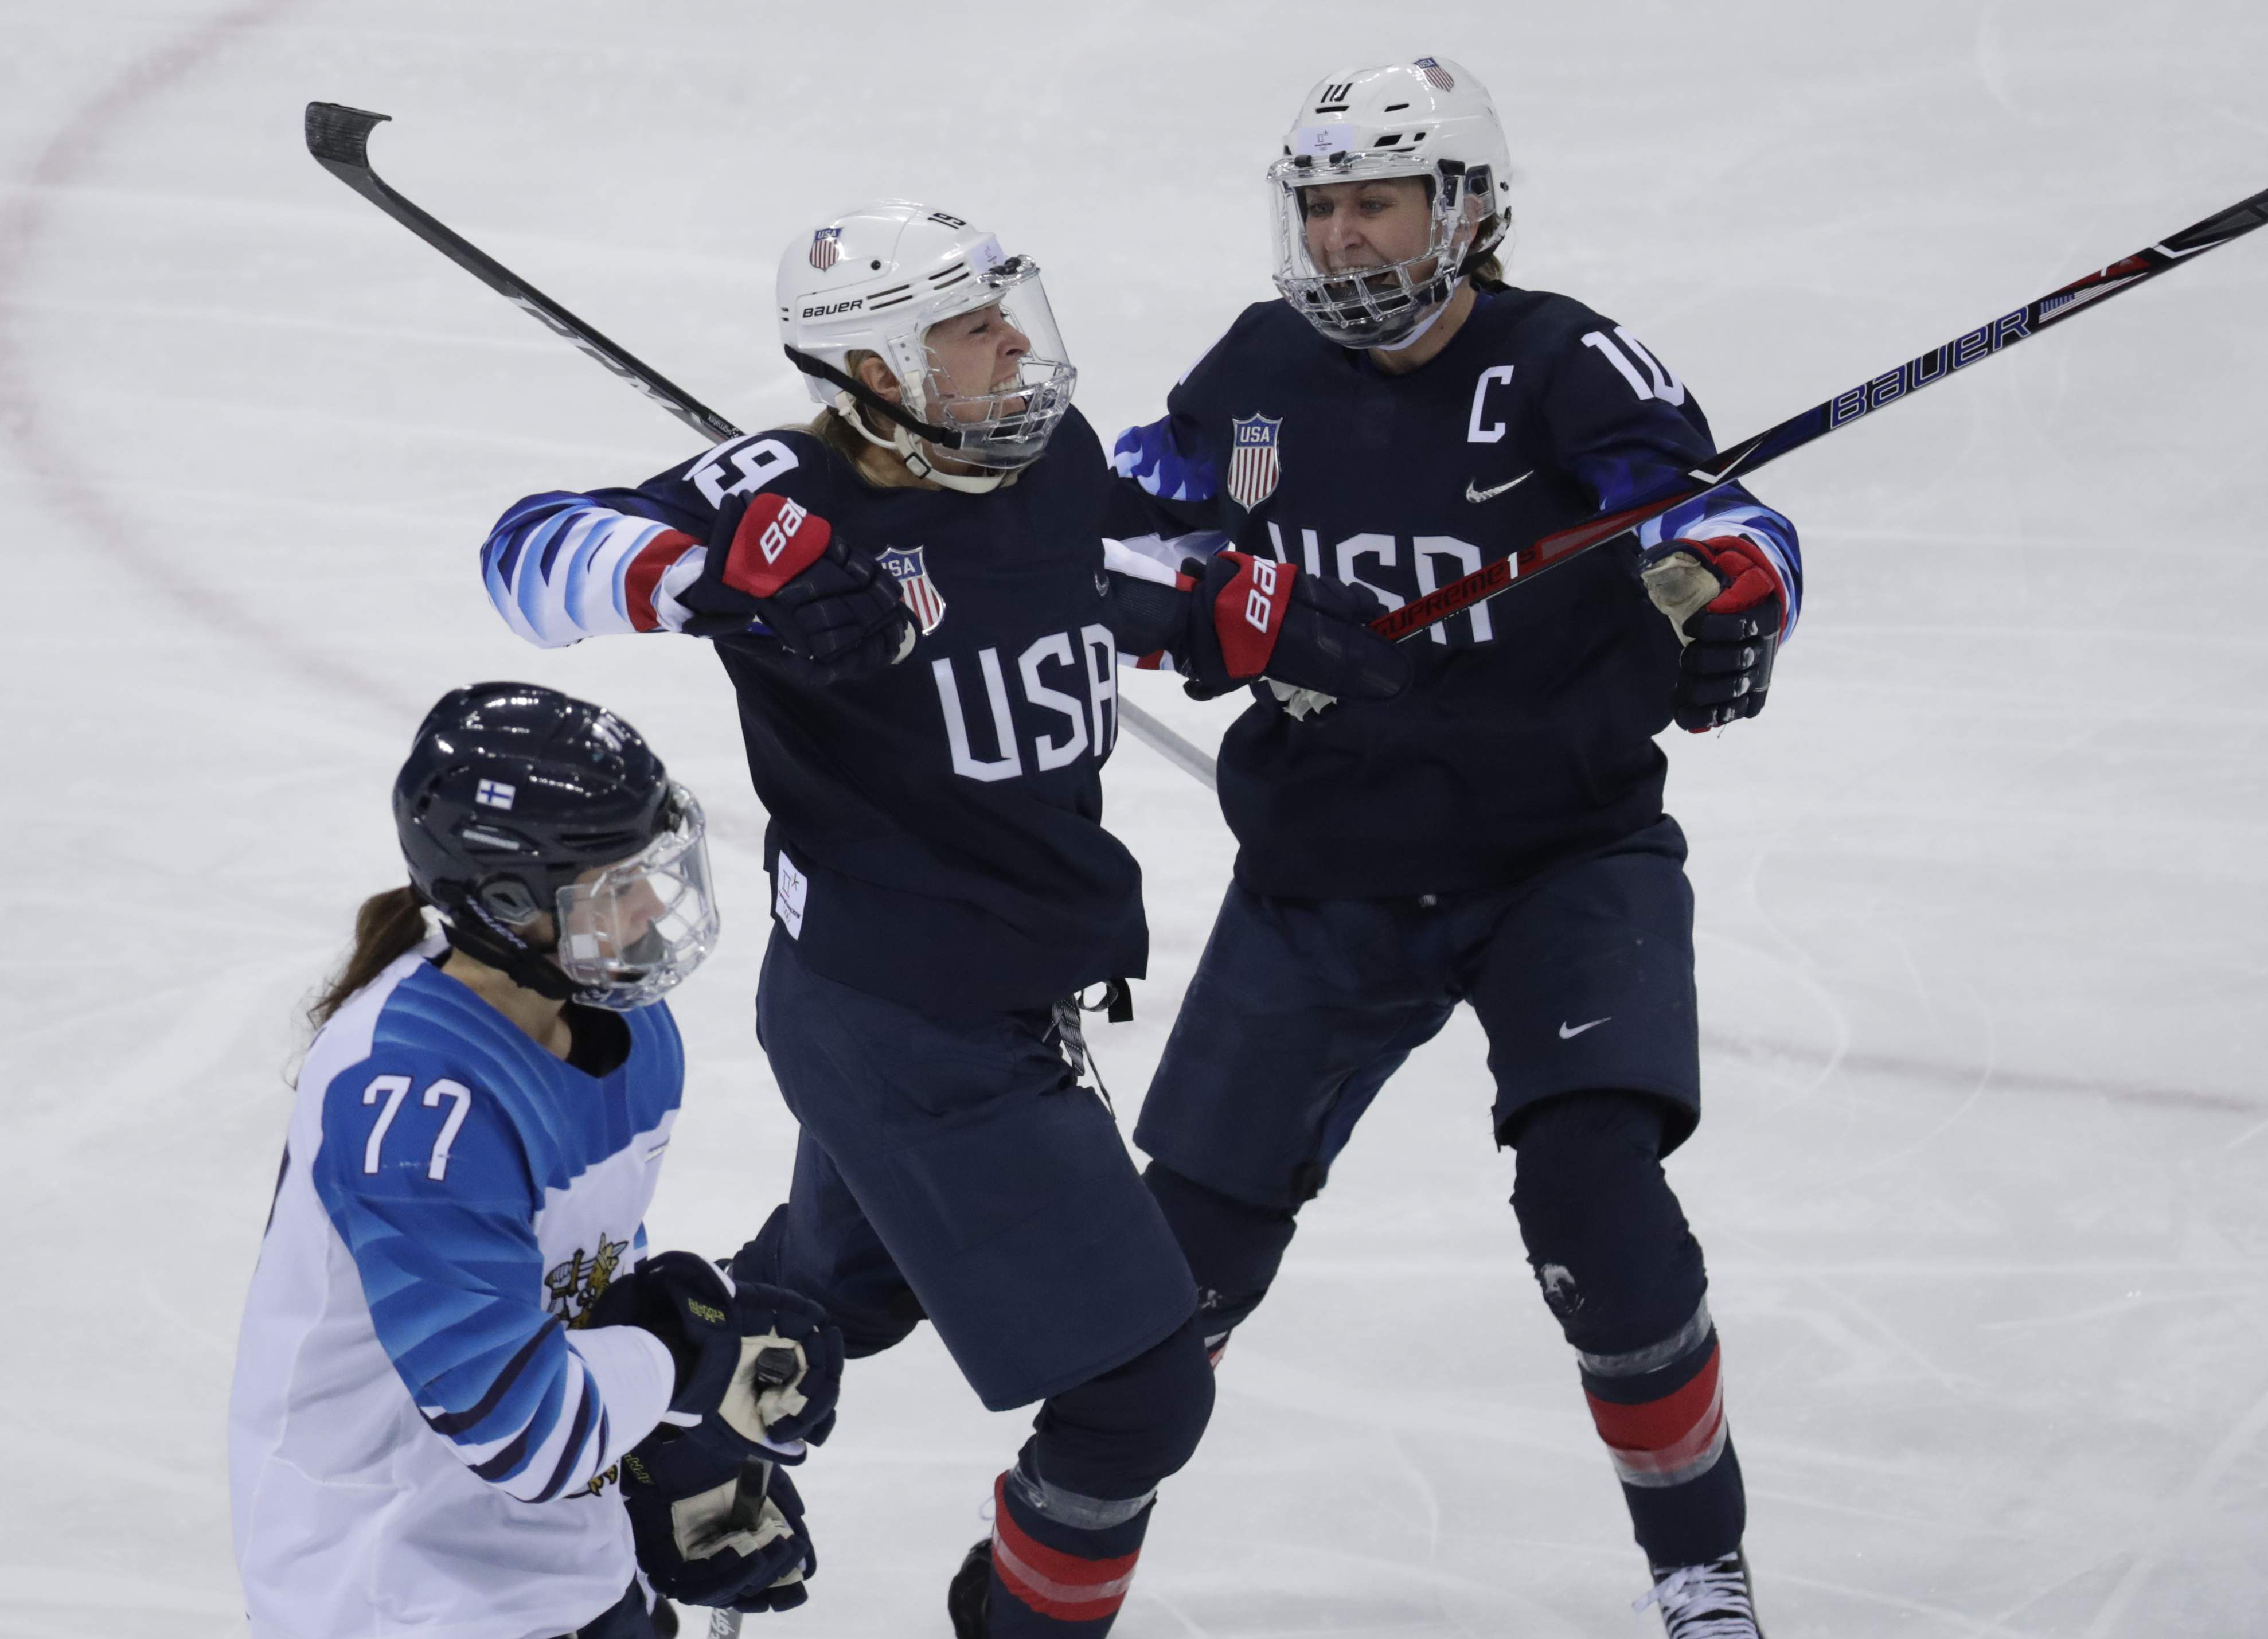 Women's ice hockey: USA beat Finland to set up gold medal showdown with  Canada, Winter Olympics 2018